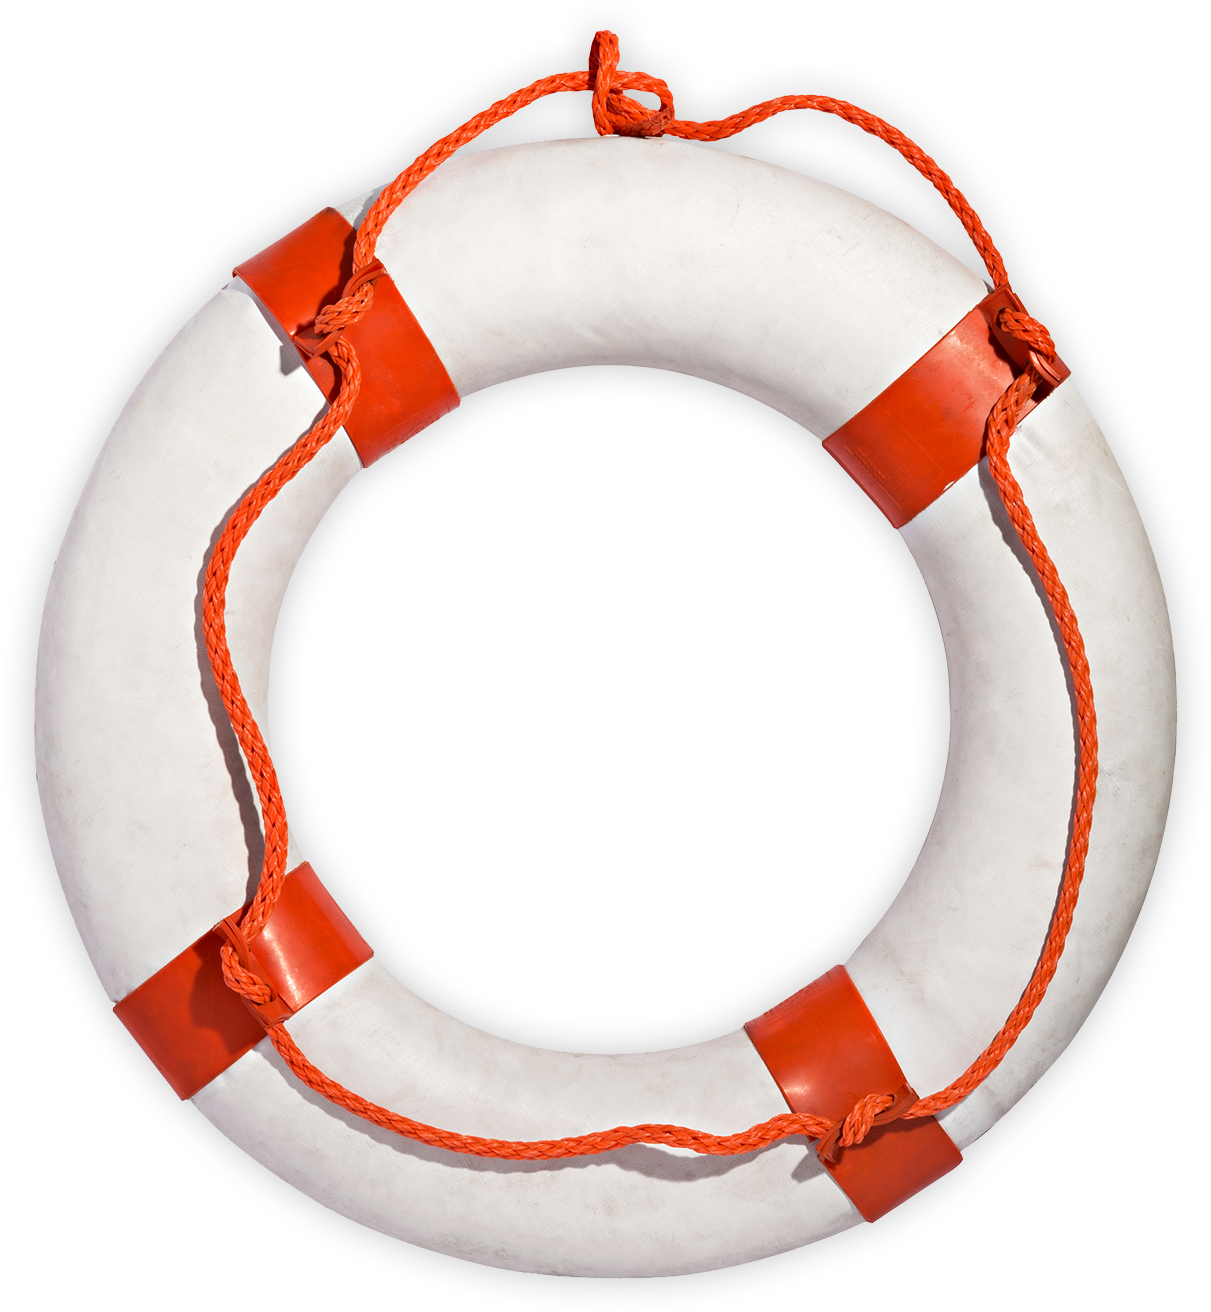 Lifebuoy Safety Equipment.png PNG